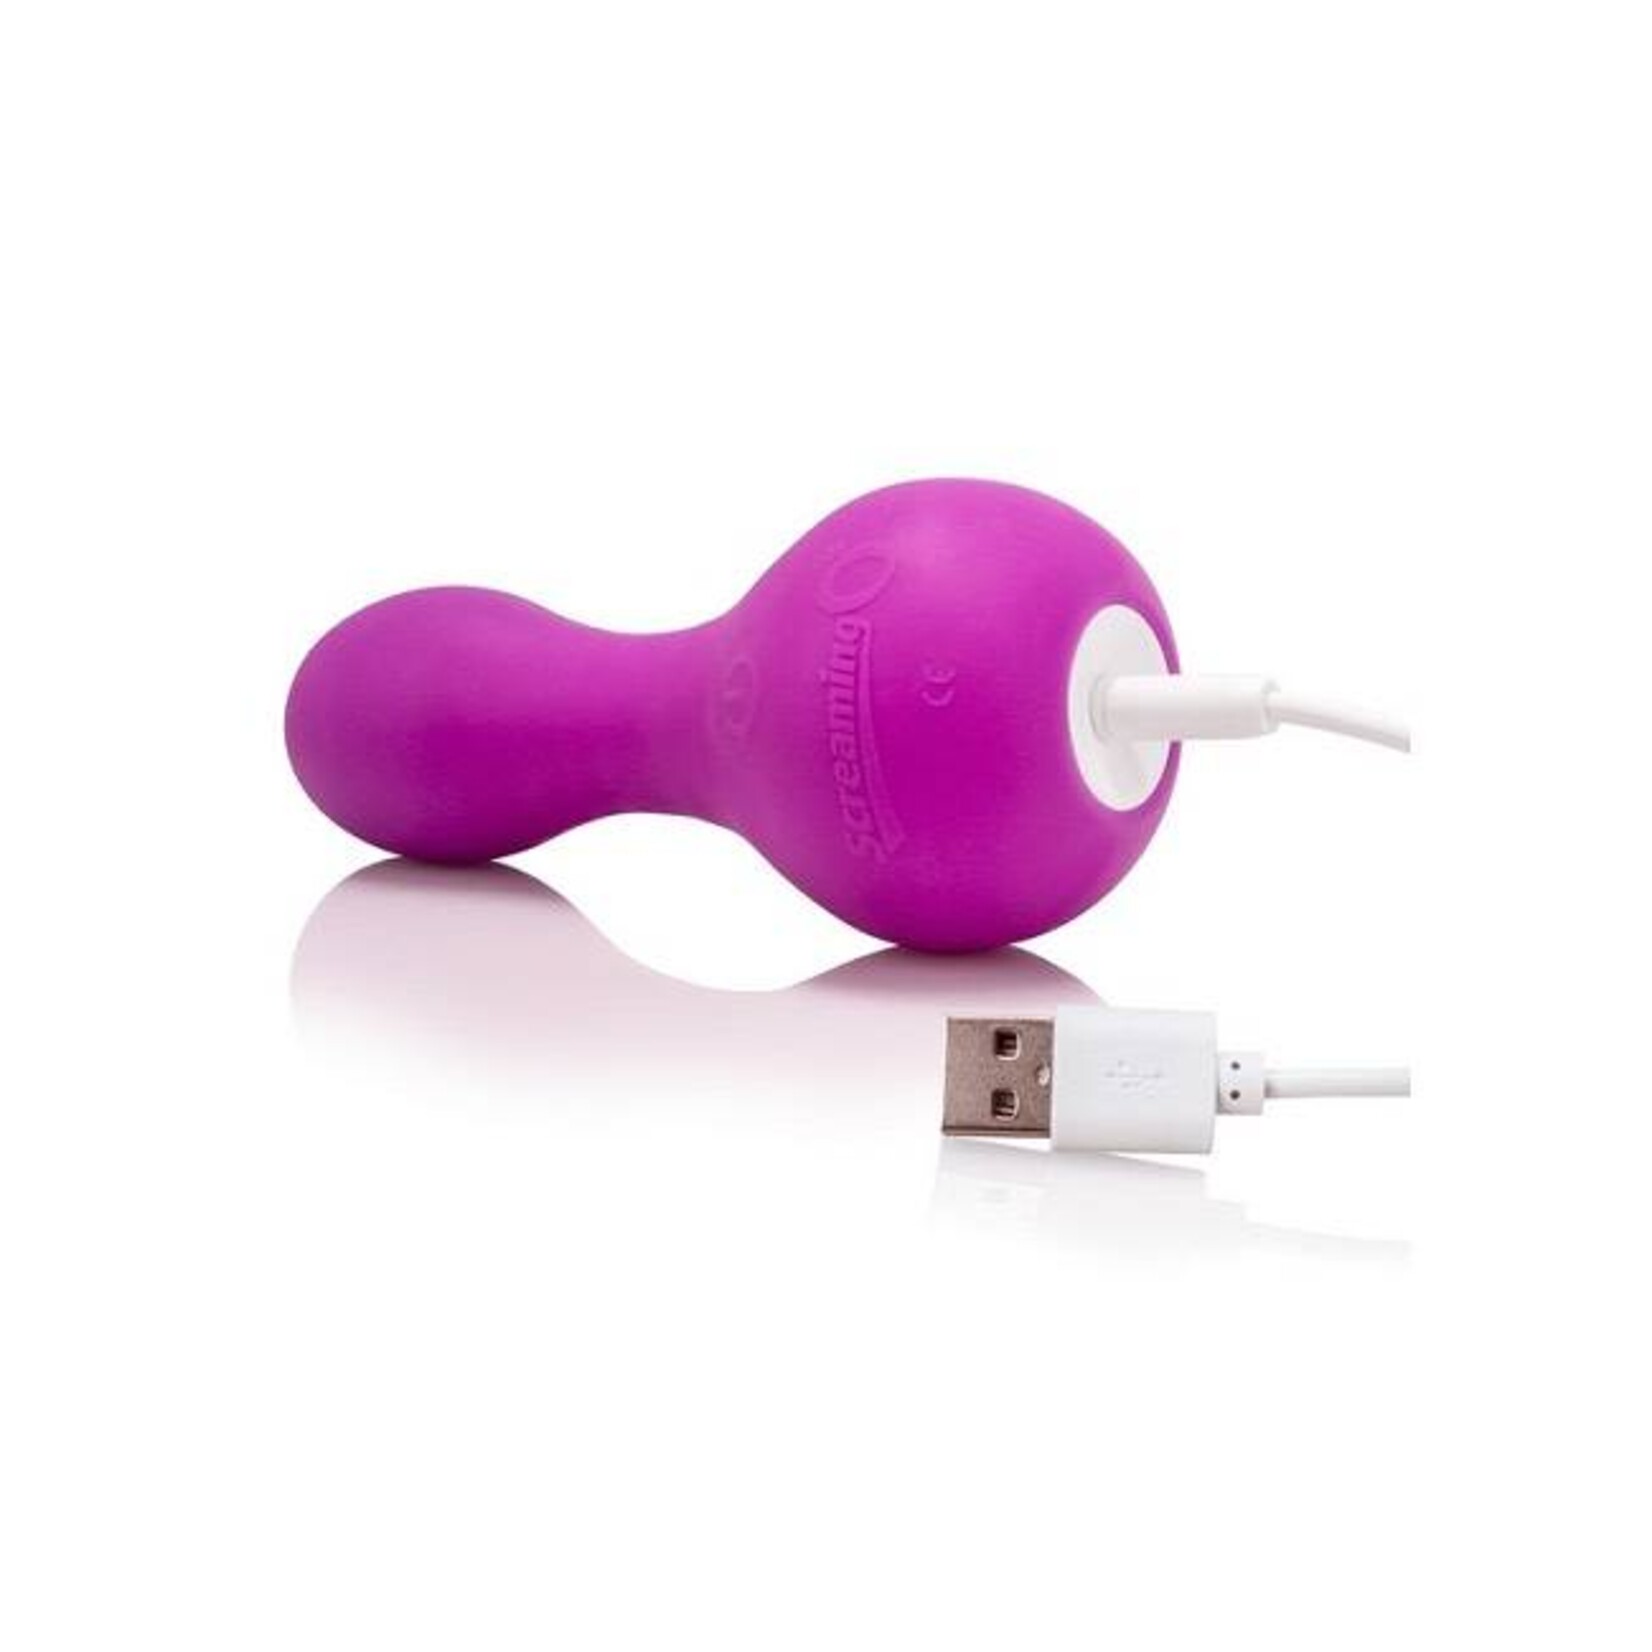 Screaming O Screaming O - Affordable Rechargeable Moove